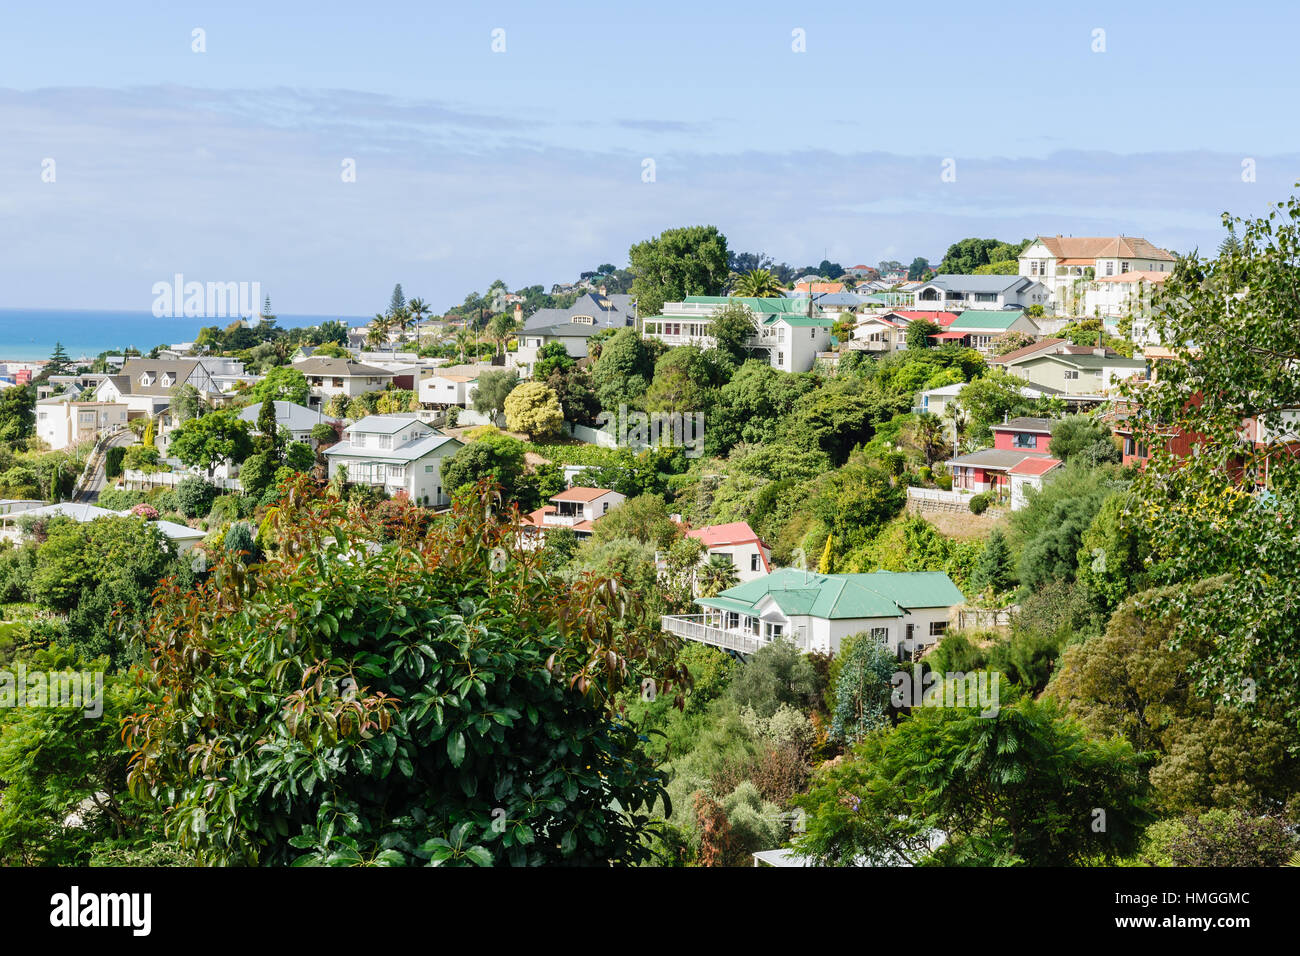 Bluff Hill residential area in the coastal city of Napier Hawkes Bay New Zealand overlooking the Pacific coast showing typical New Zealand housing Stock Photo